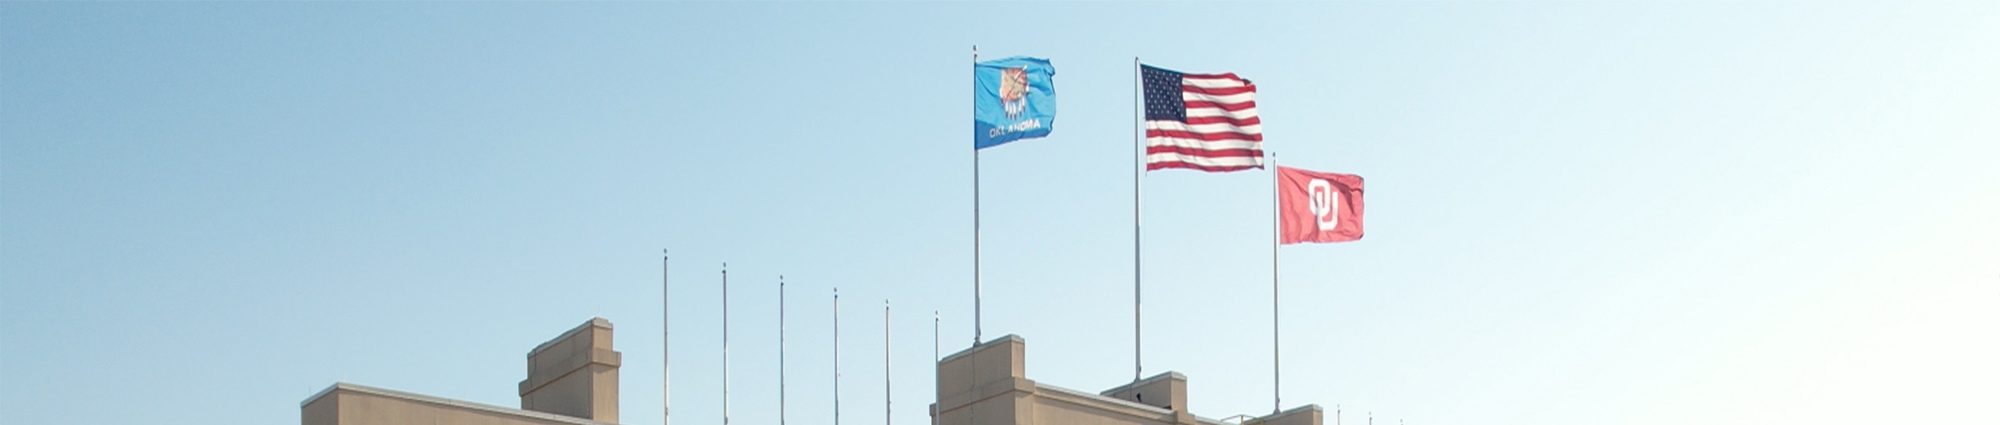 State of Oklahoma flag, US flag, and OU flag on top of building.